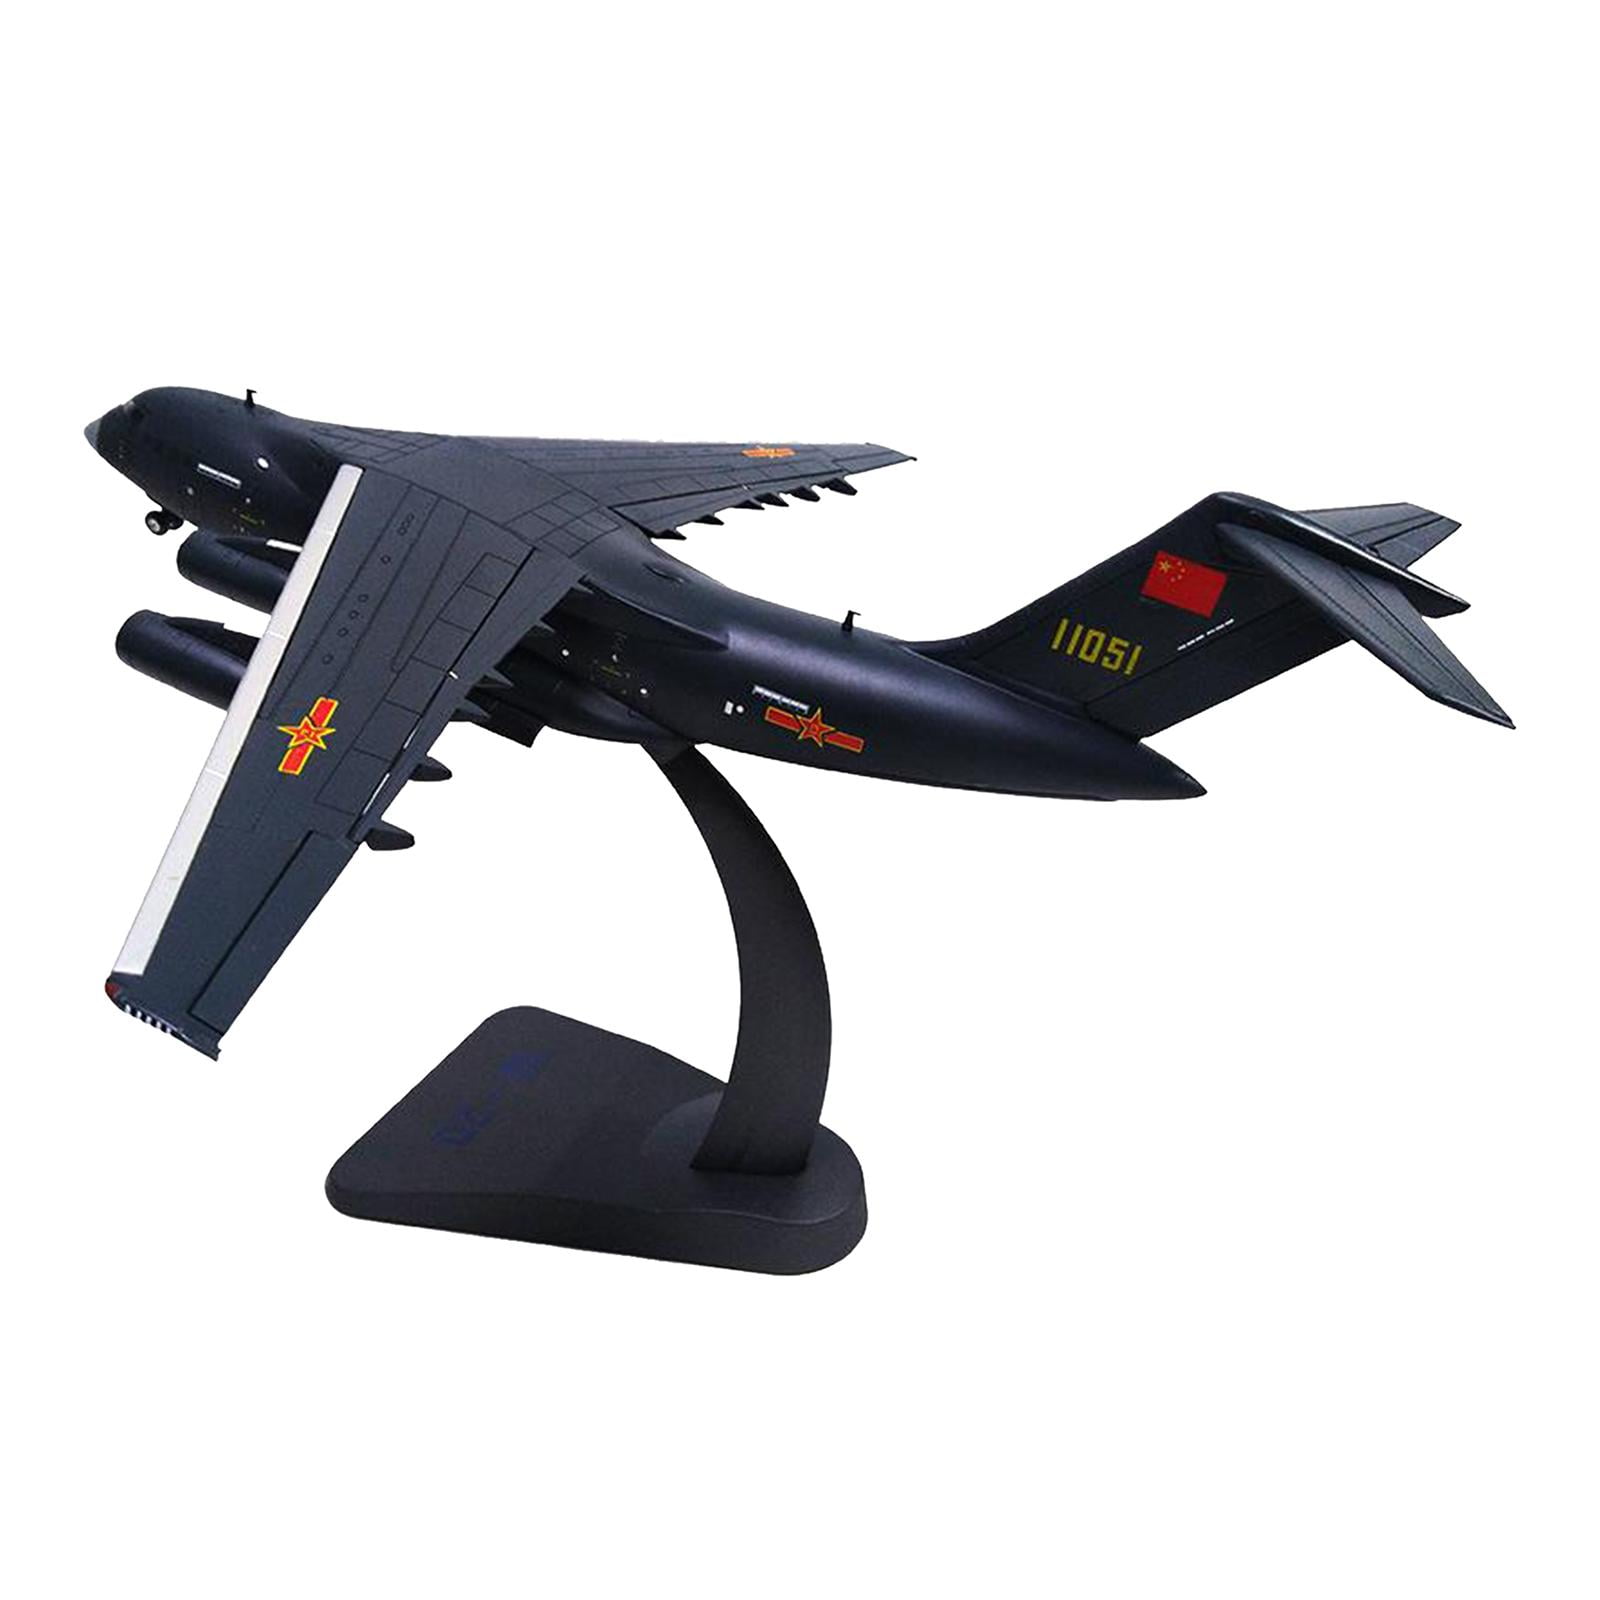 1:400 Scale Metal Plane Model Aircraft Diecast Aeroplane Gift w/ Display Stand 